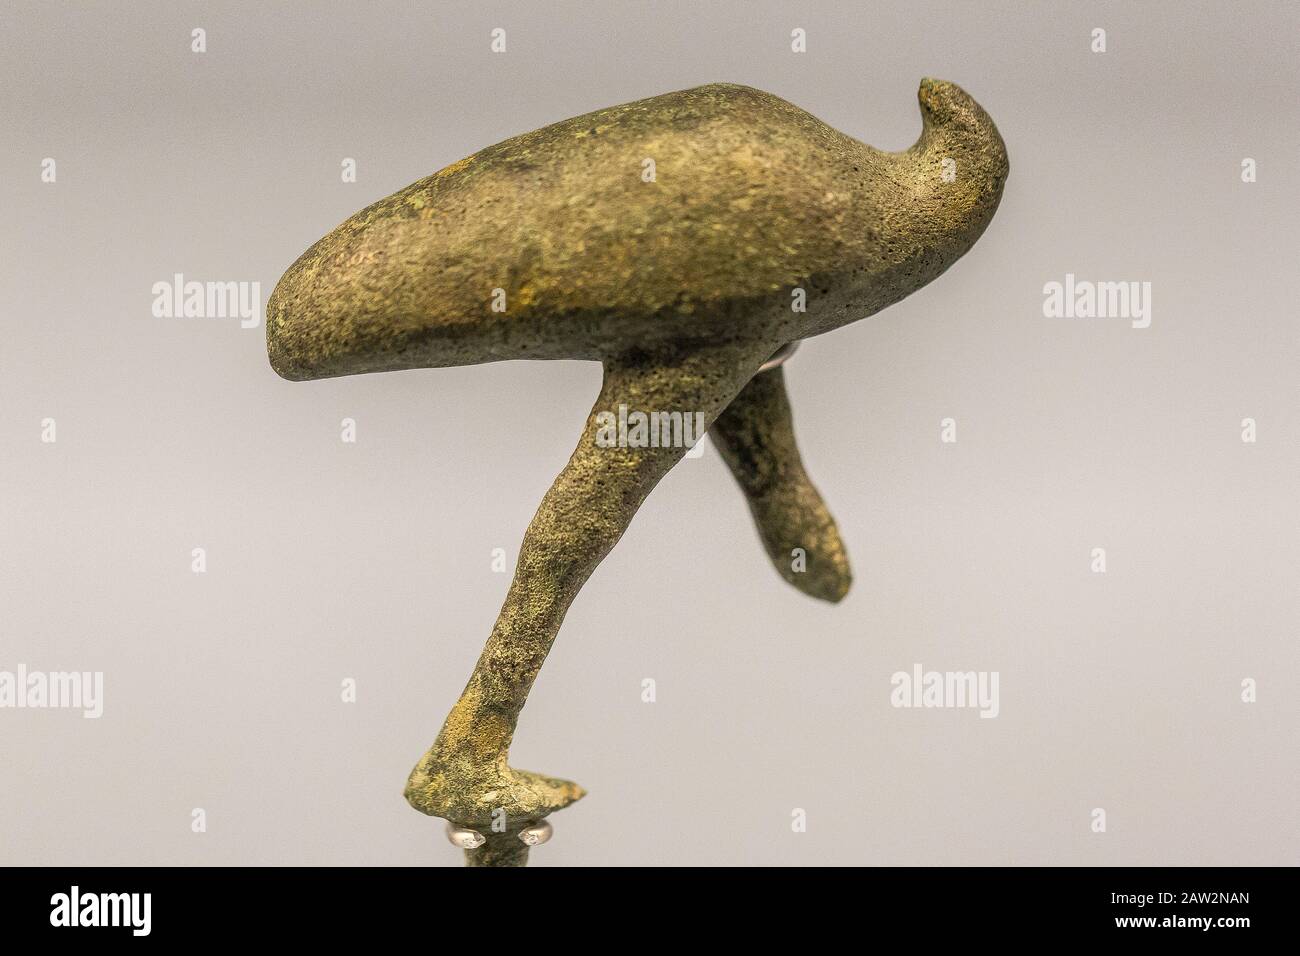 Photo taken during the opening visit of the exhibition “Osiris, Egypt's Sunken Mysteries”. Egypt, Alexandria, Maritime Museum, statuette of an ibis. Stock Photo